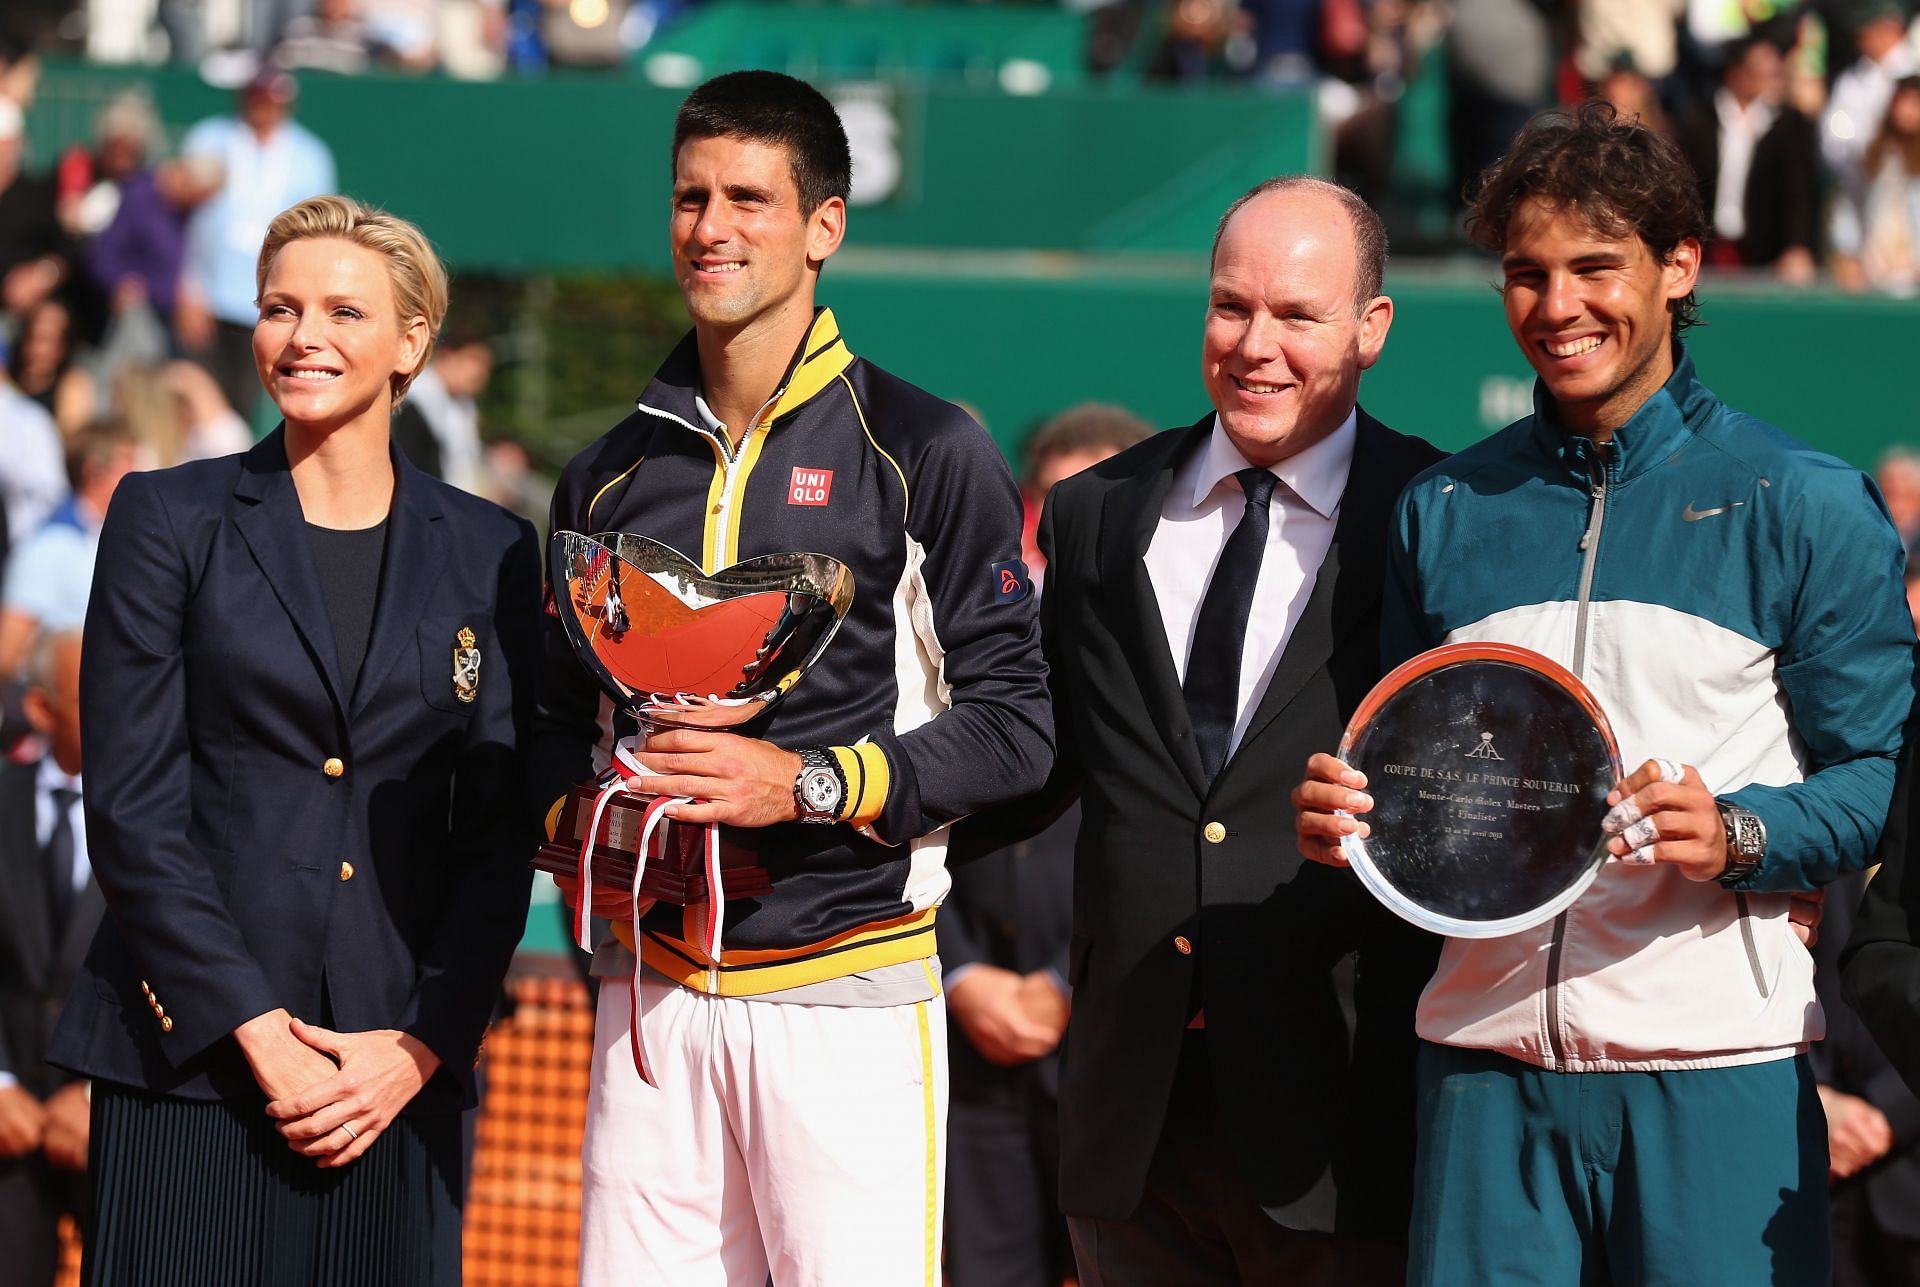 Nadal and Djokovic pose after the 2013 Monte-Carlo Masters final